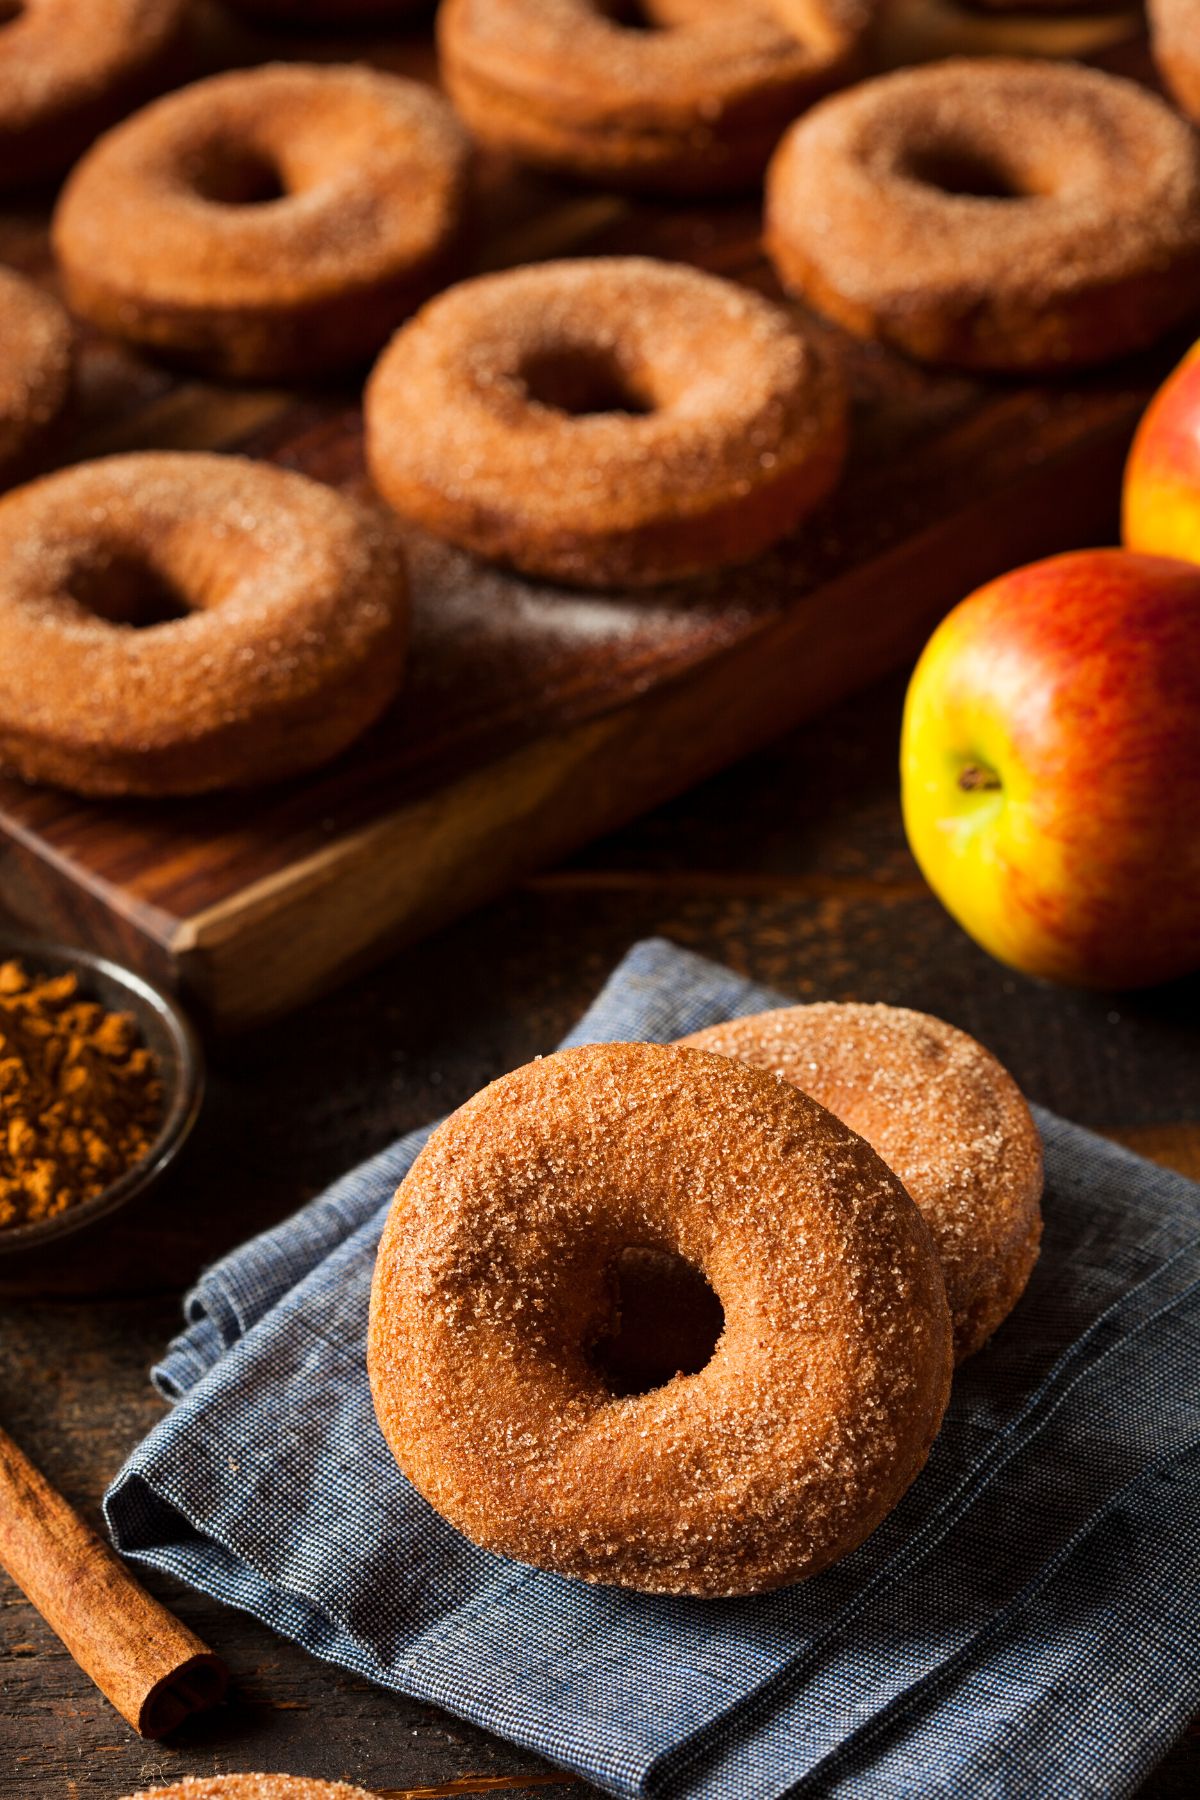 Apple cider donuts on a wooden board.